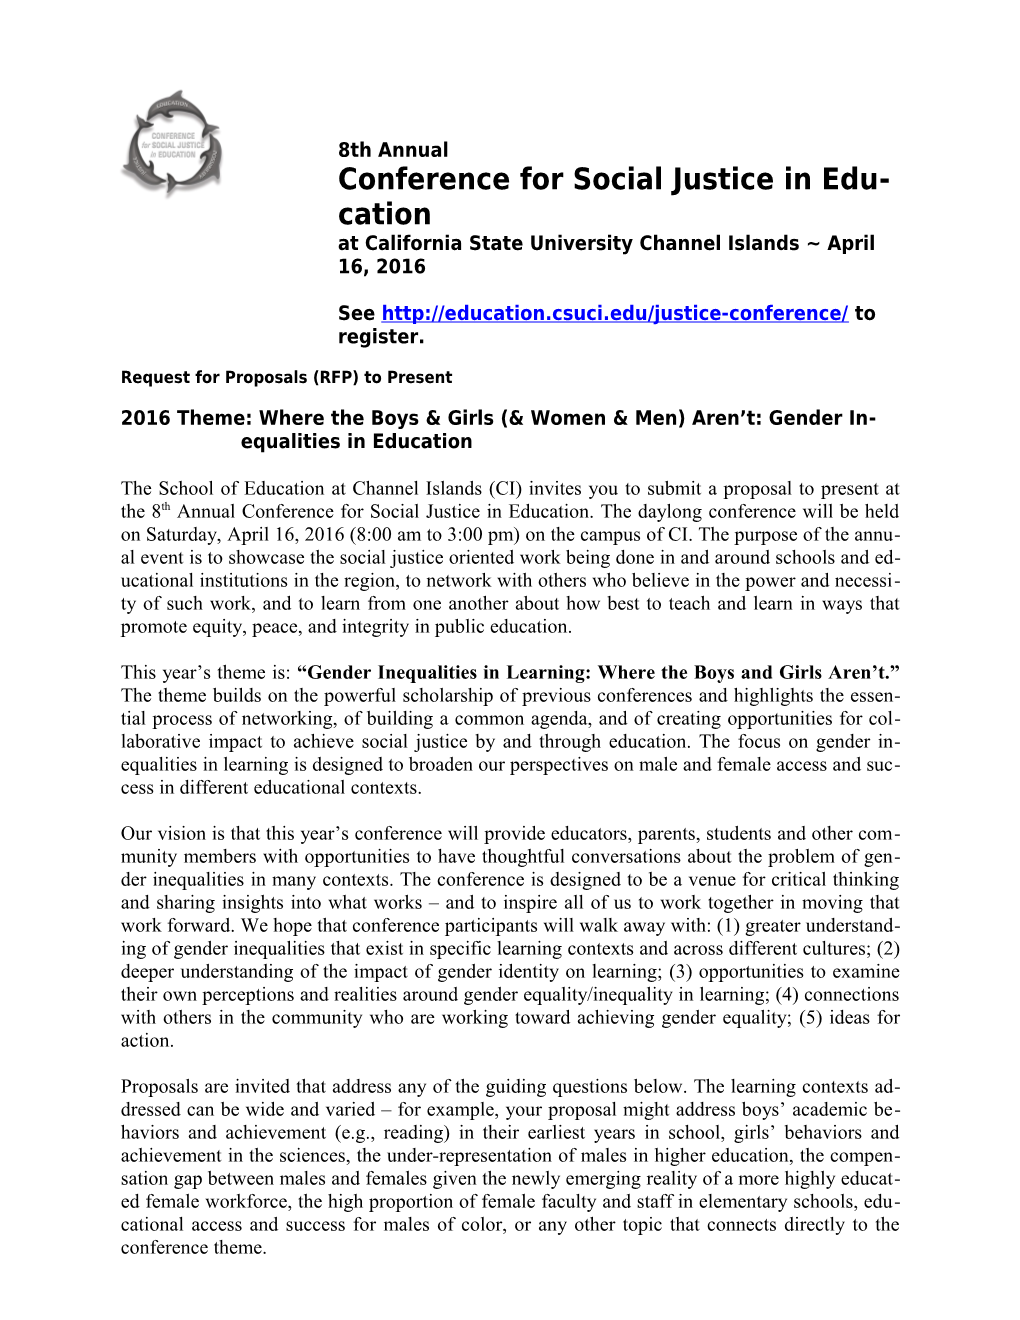 Conference for Social Justice in Education